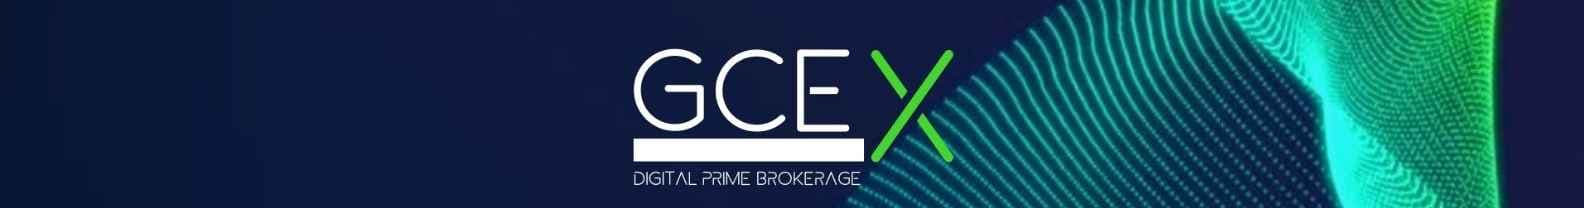 GCEX profile banner